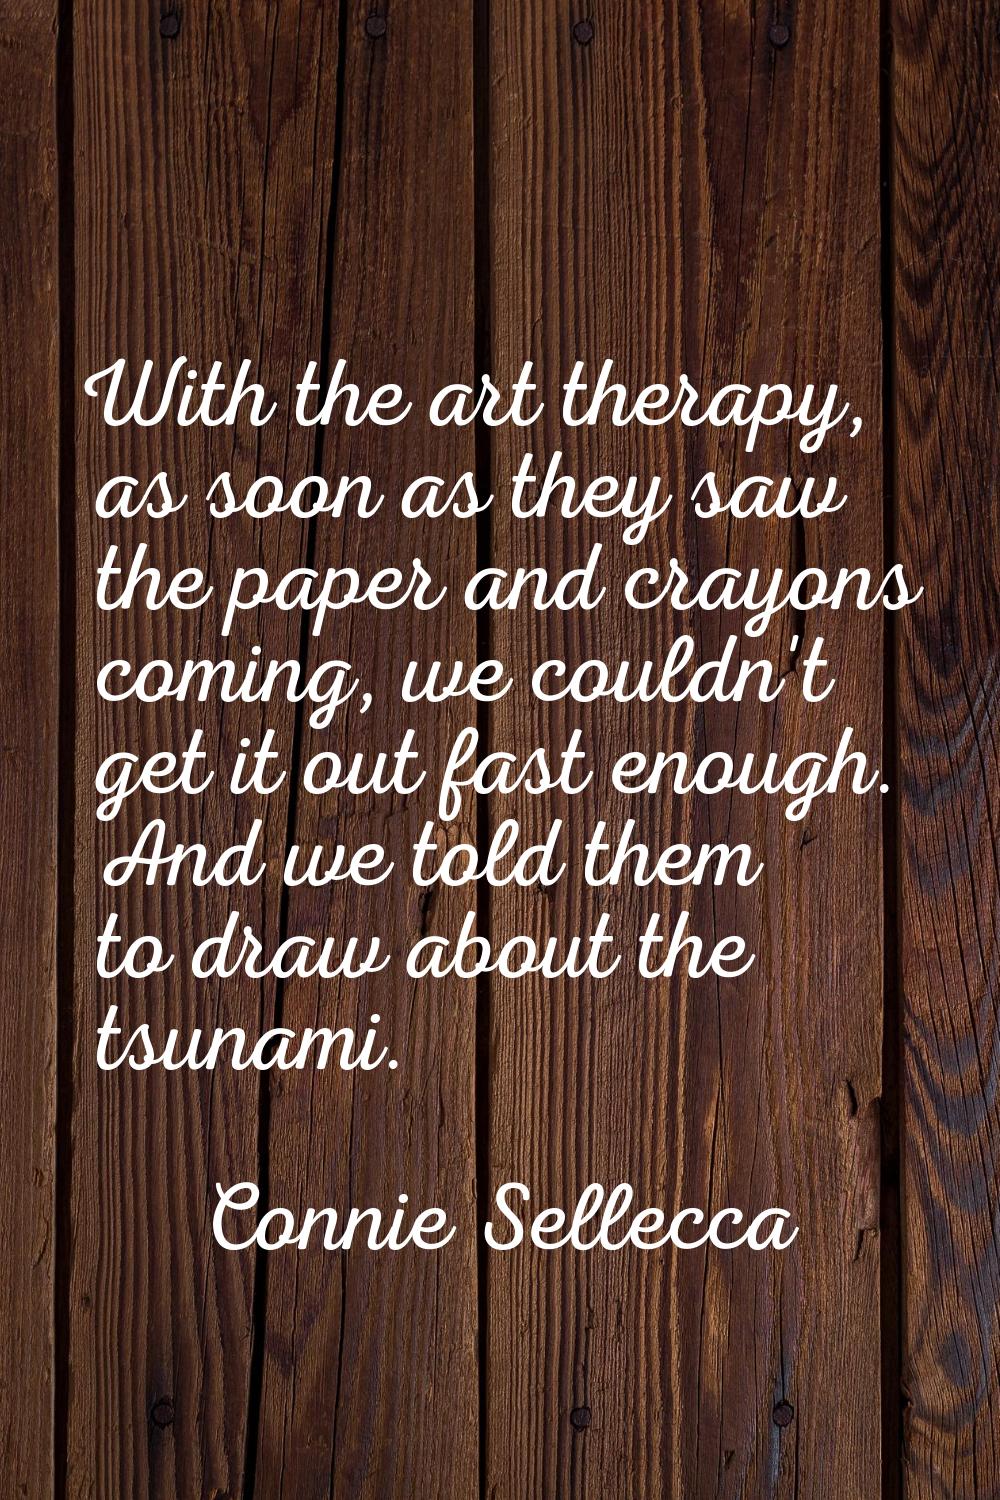 With the art therapy, as soon as they saw the paper and crayons coming, we couldn't get it out fast